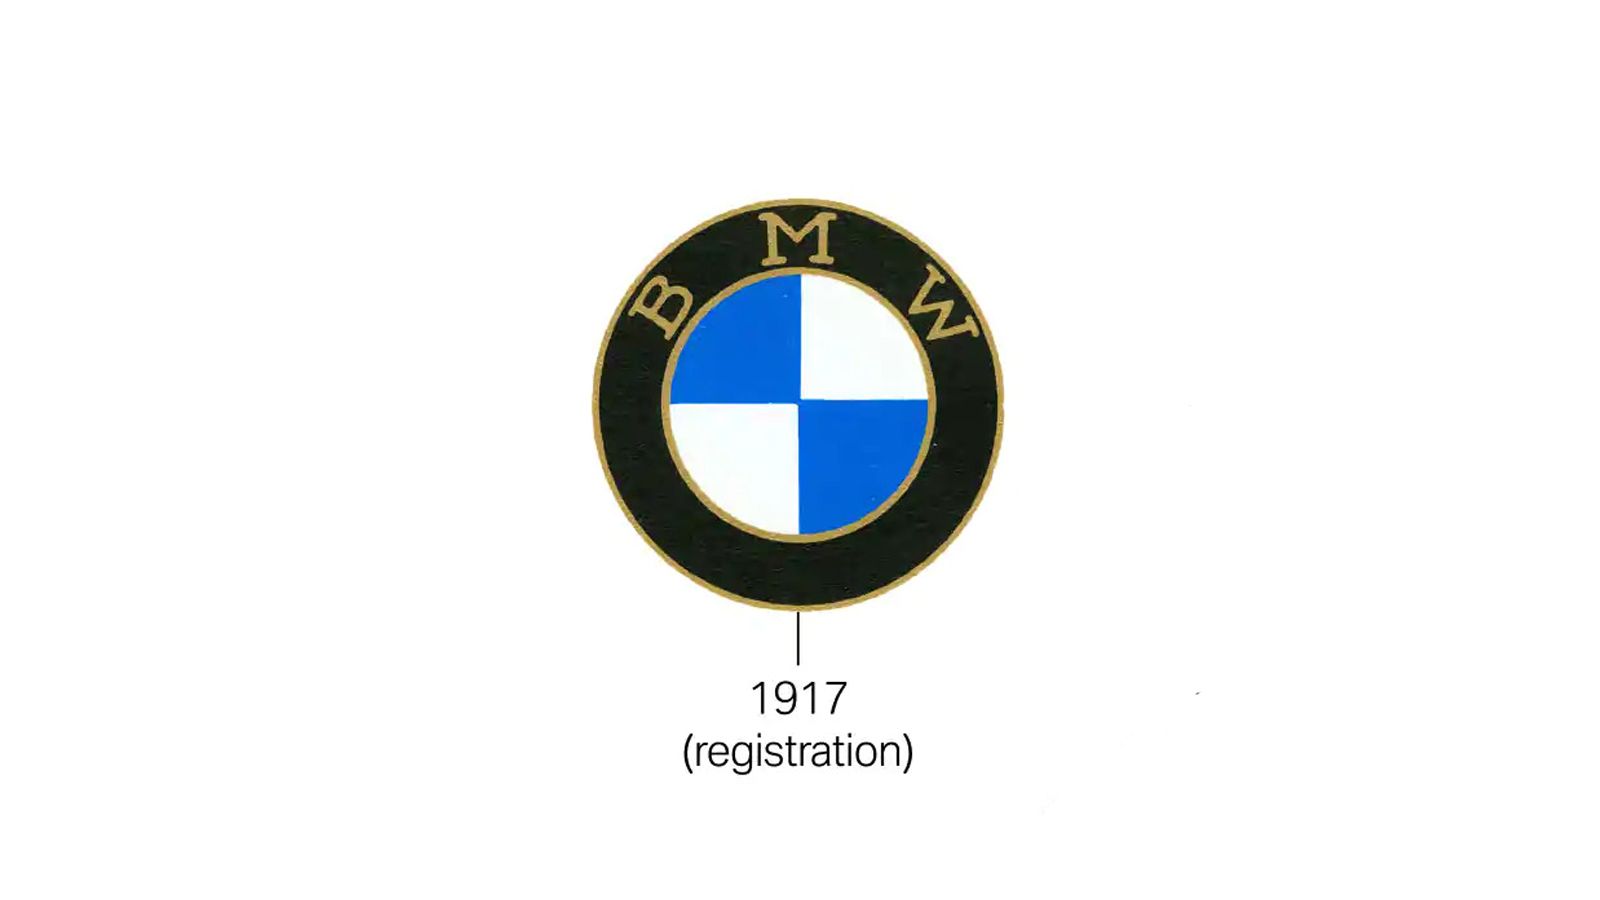 BMW logo in chronological sequence: 1917, 1933, 1954, 1974, 1979, 2007  (03/2007)